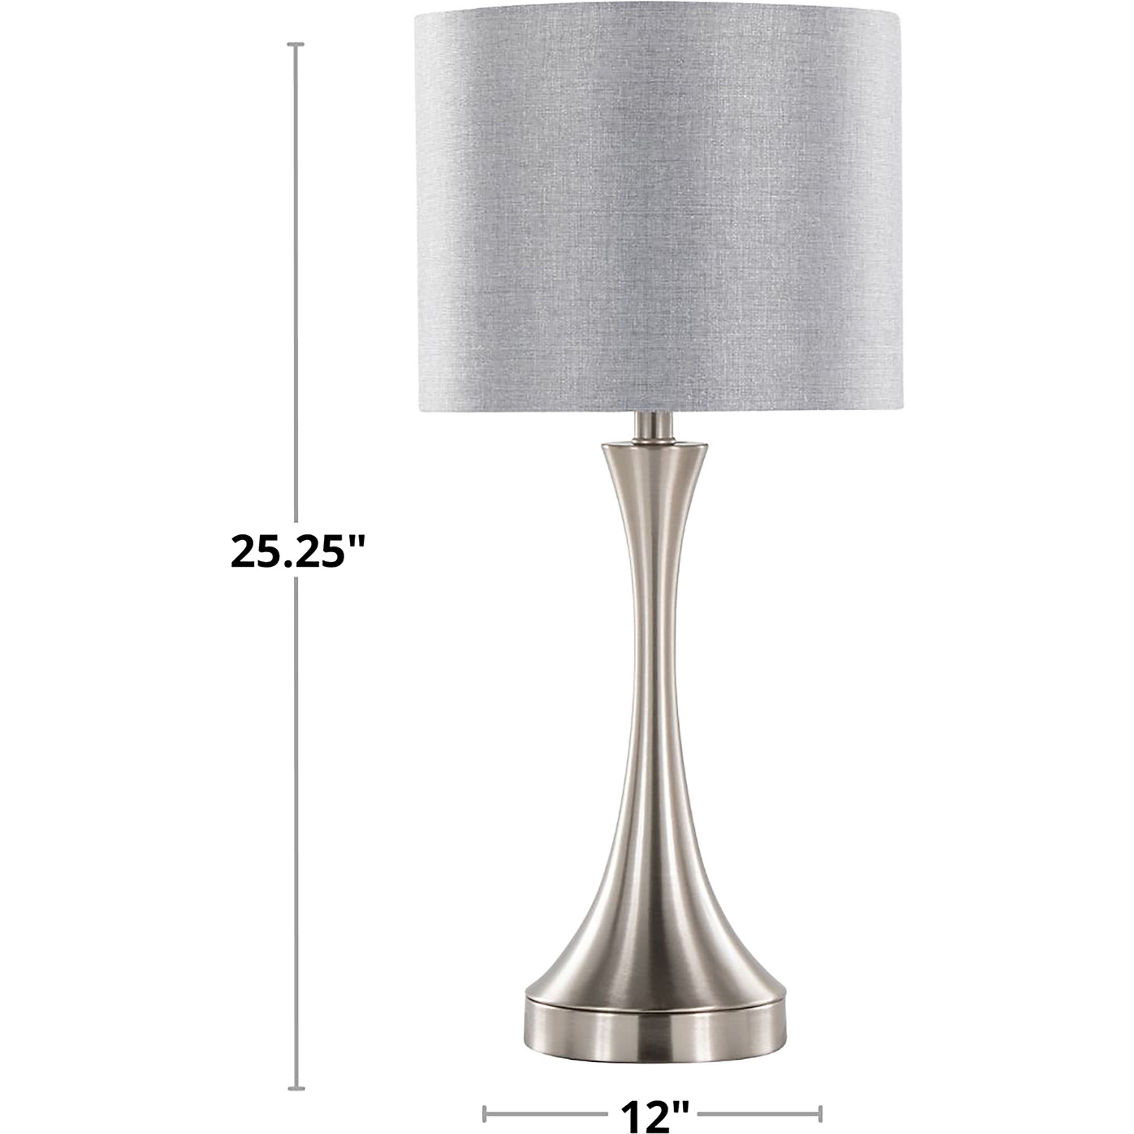 LumiSource Lenuxe 25.25 in. Metal Table Lamp with USB 2 pk. - Image 6 of 9